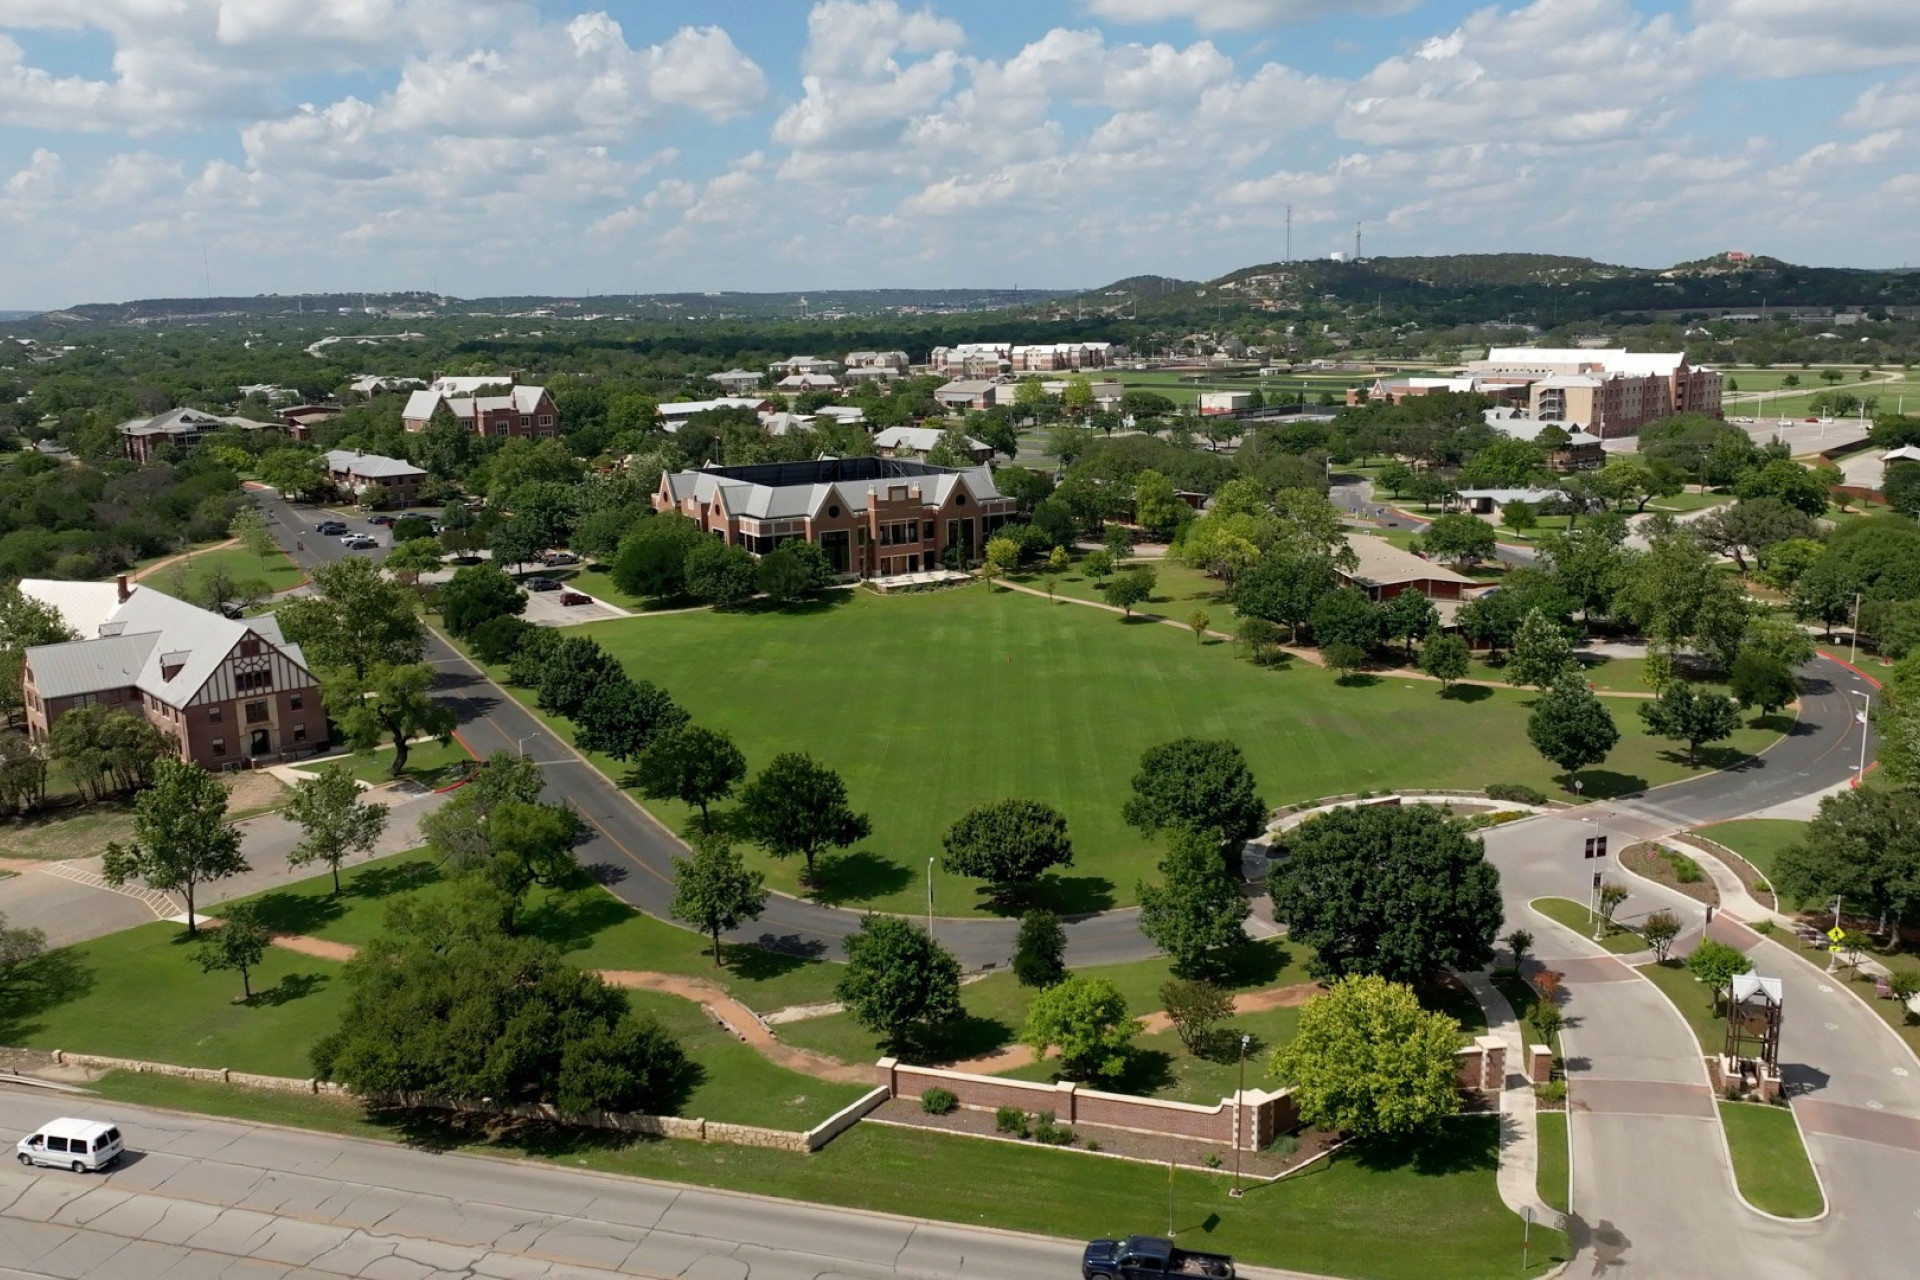 Aerial view of Kerville park